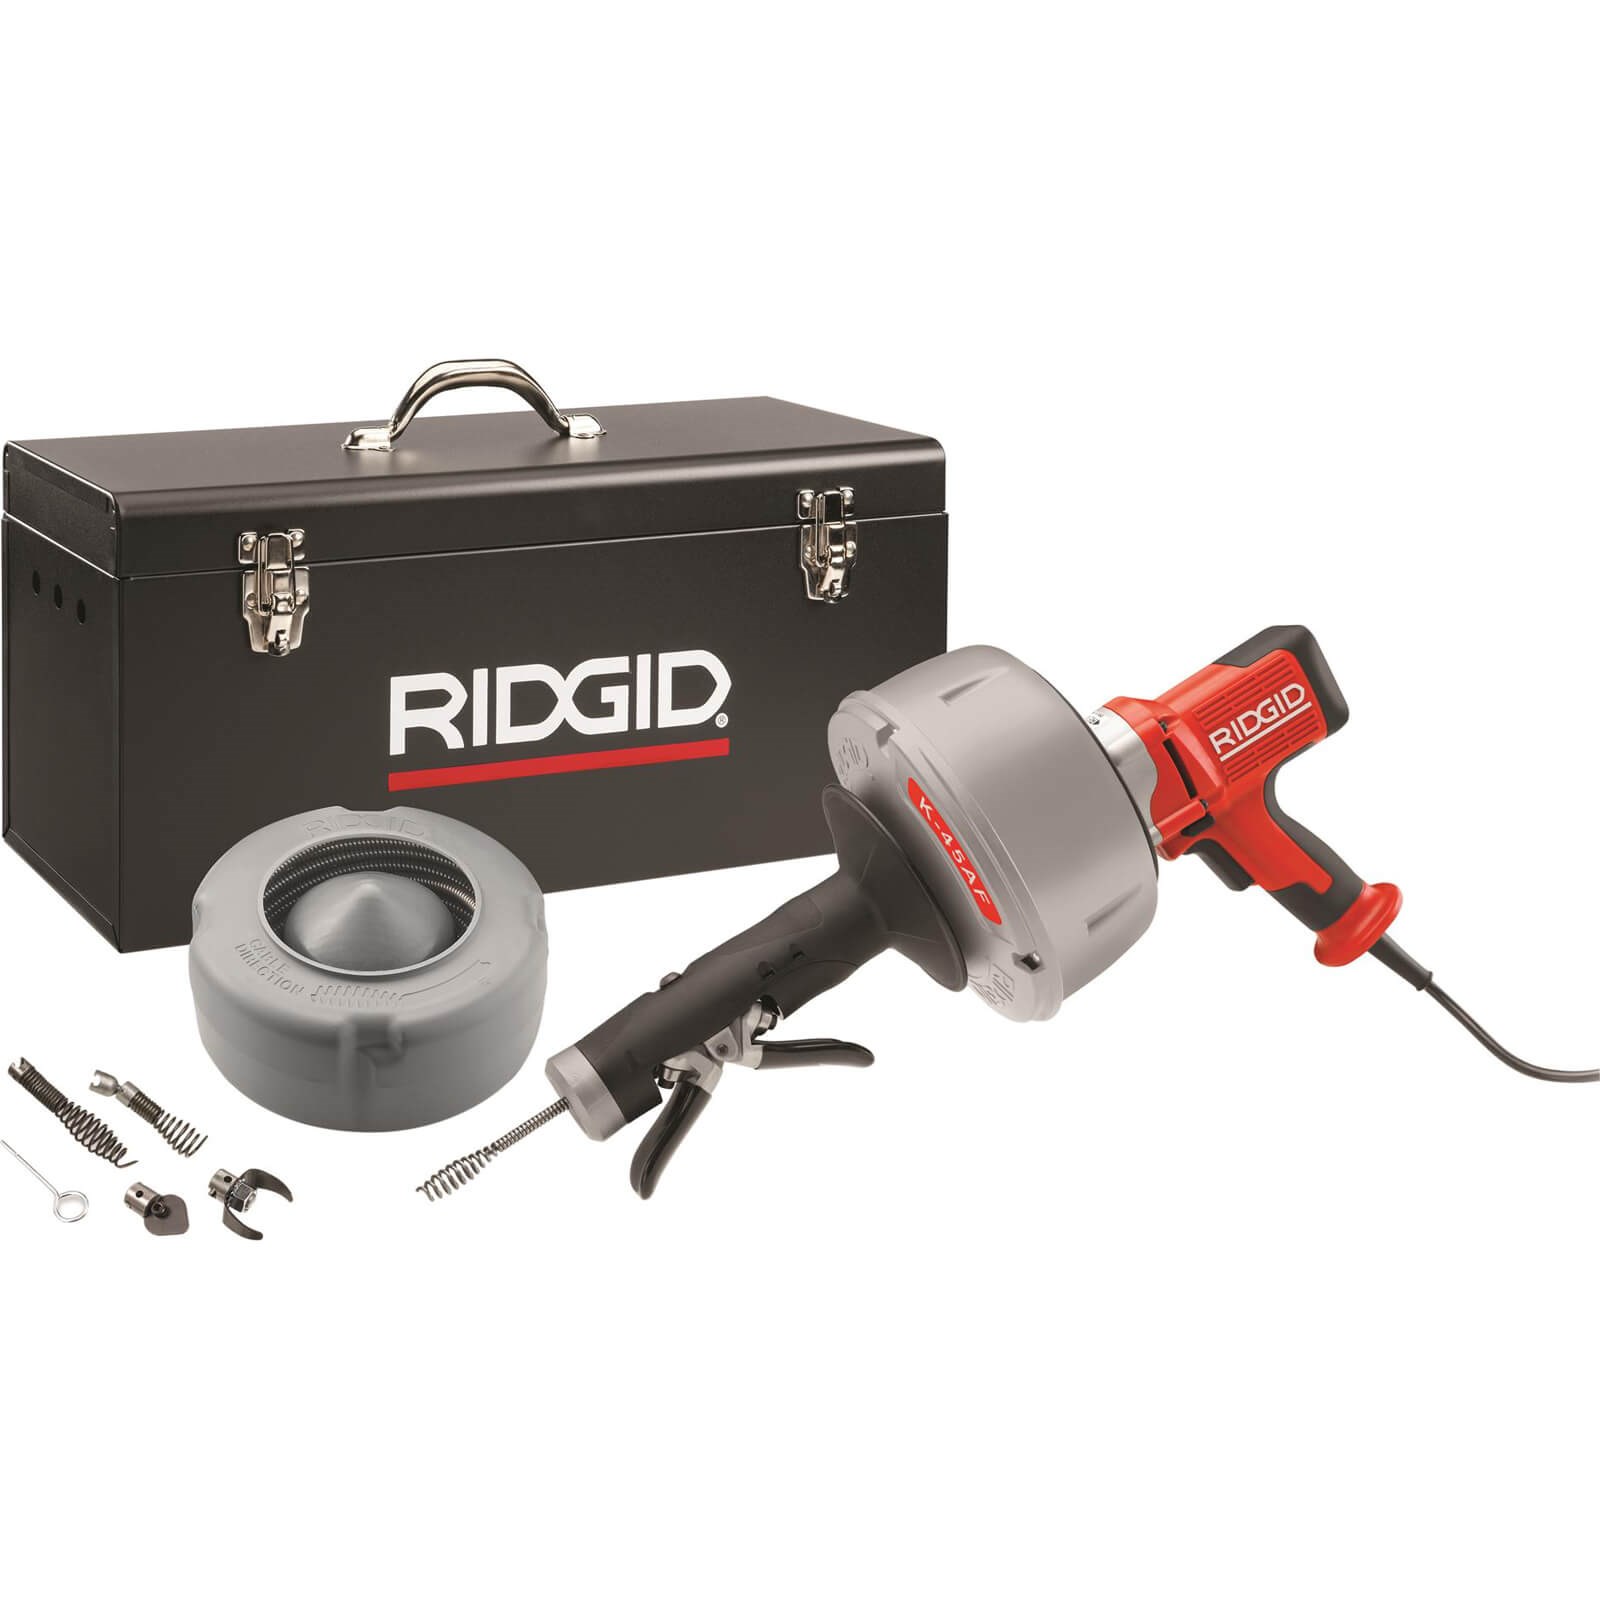 Ridgid K45 Variable Speed Drain Cleaning Gun and Accessory Set | Drain &  Pipe Augers & Snakes